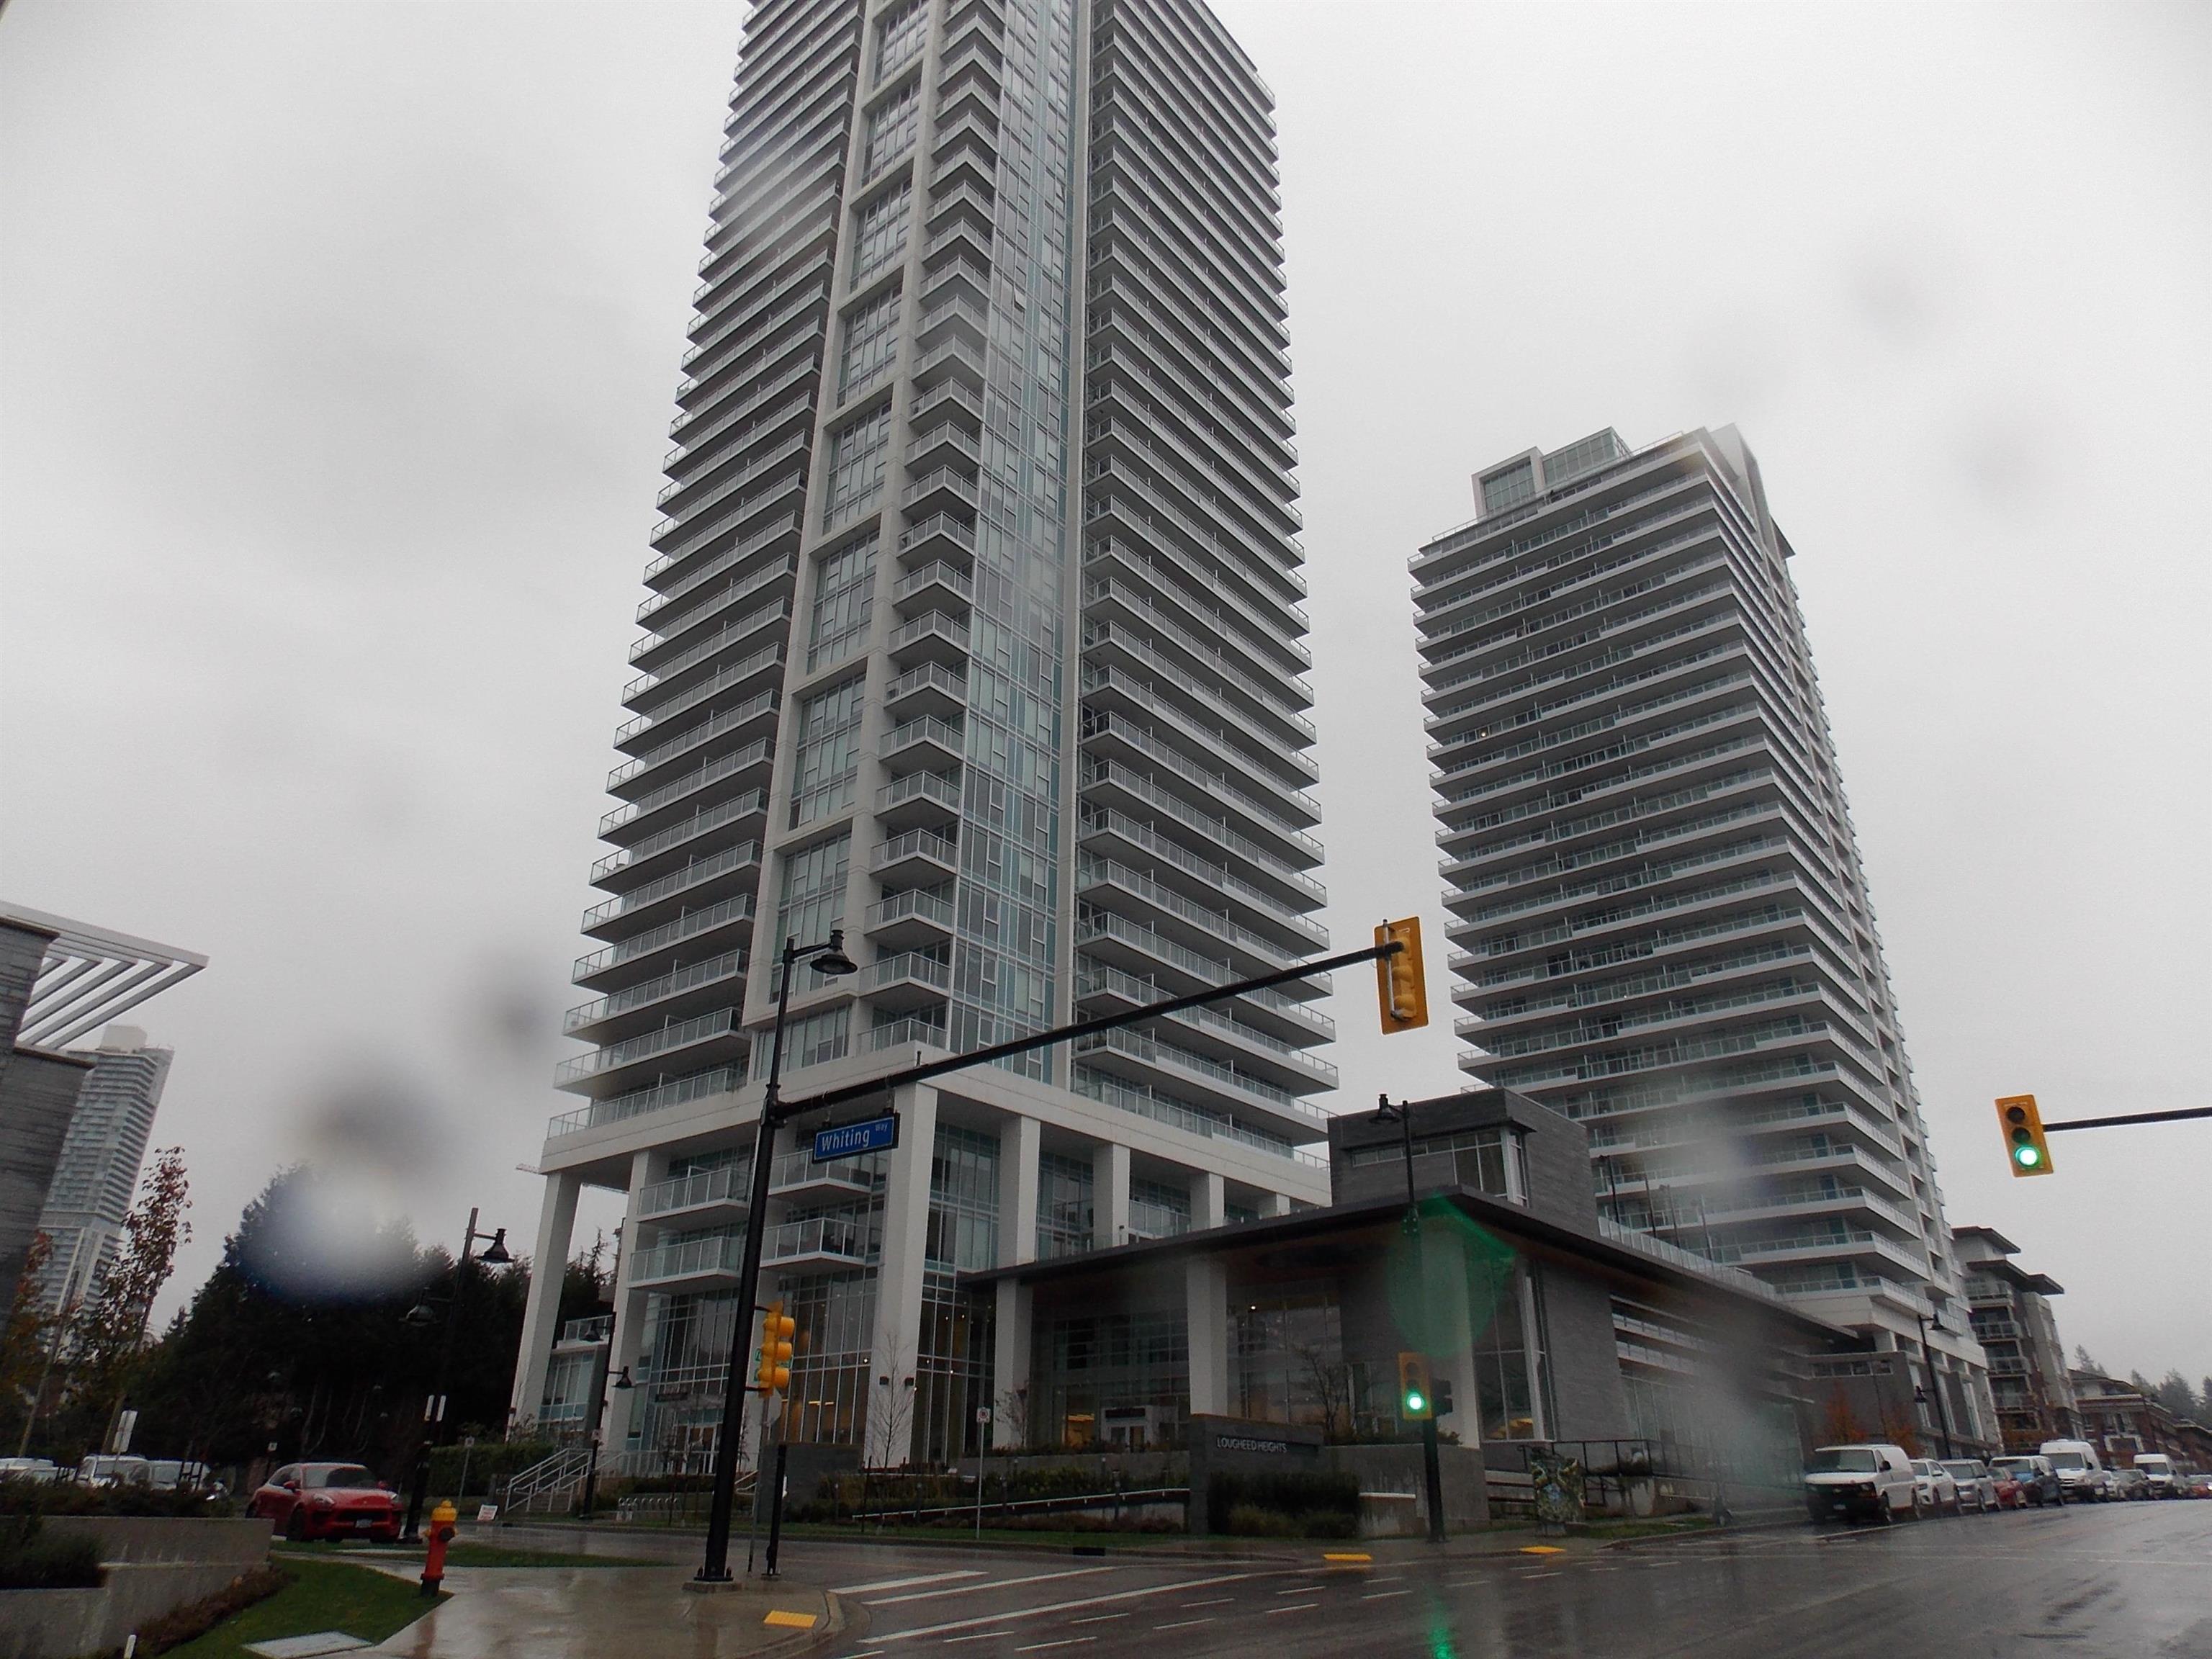 Coquitlam West Apartment/Condo for sale:  2 bedroom 967 sq.ft. (Listed 2021-11-24)